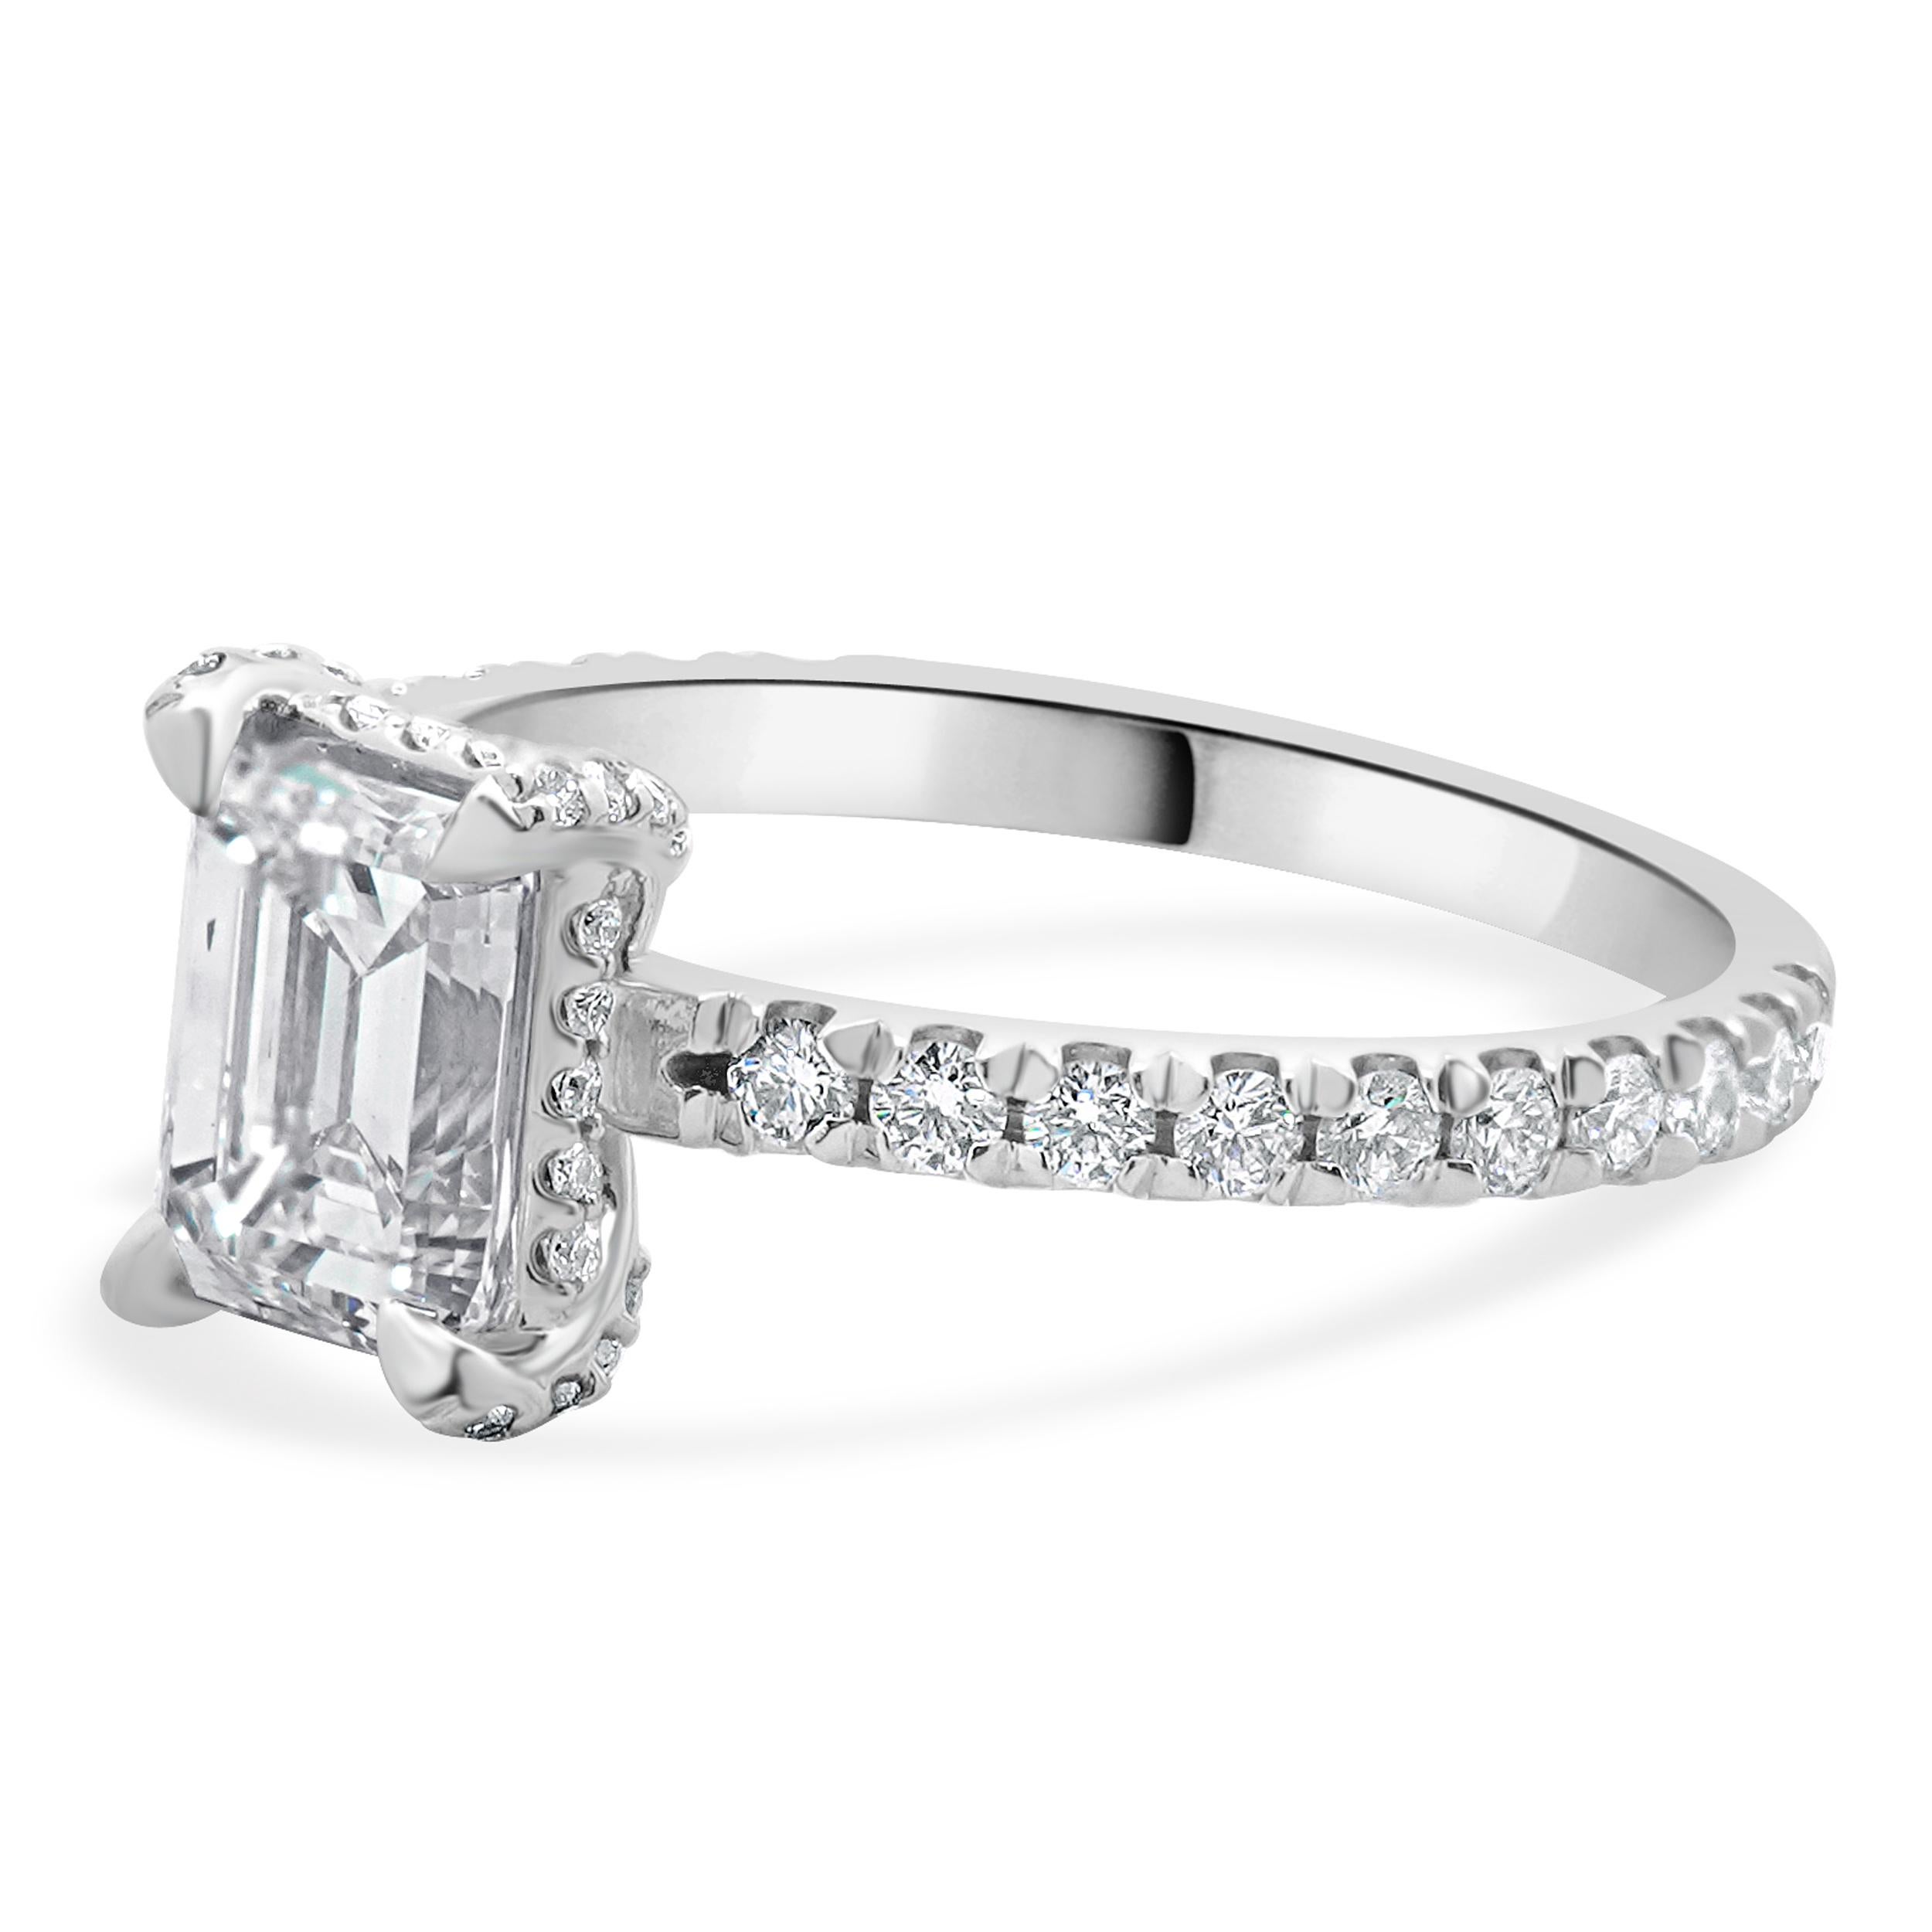 Designer: custom
Material: 14K white gold
Diamond: 1 emerald cut = 1.26ct
Color: I
Clarity: VVS2
Diamond: 52 round brilliant = 0.92cttw
Color: H
Clarity: SI1
Ring Size: 6.5 (complimentary sizing available)
Weight: 2.88 grams
